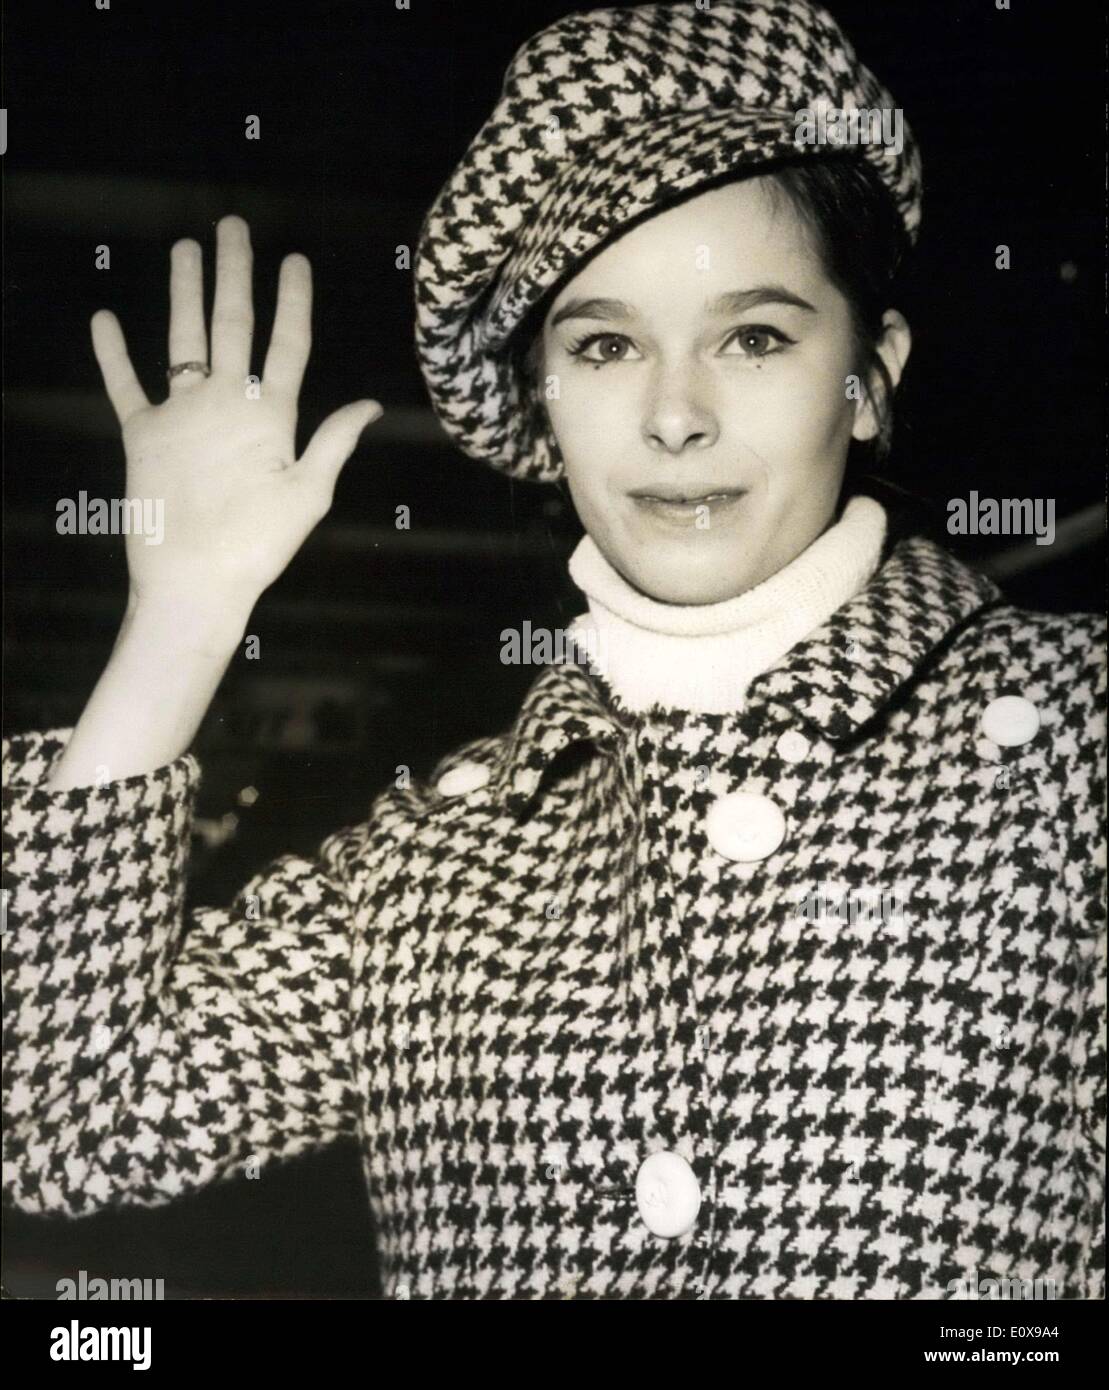 Dec. 07, 1965 - Off to New York: Geraldine Chaplin, Charlie Chaplin's actress daughter, left for New York this morning. She will attend the World Premier of the film ''Doctor Zhivago'', based on the famous Pastenak's novel in which she plays the role of Zhivago's wife opposite to Omar Sharif. Photo shows Geraldine Chaplin wearing a checkered travel outfit and a kid cap pictured at Orly Airport prior to boarding the plane. Stock Photo